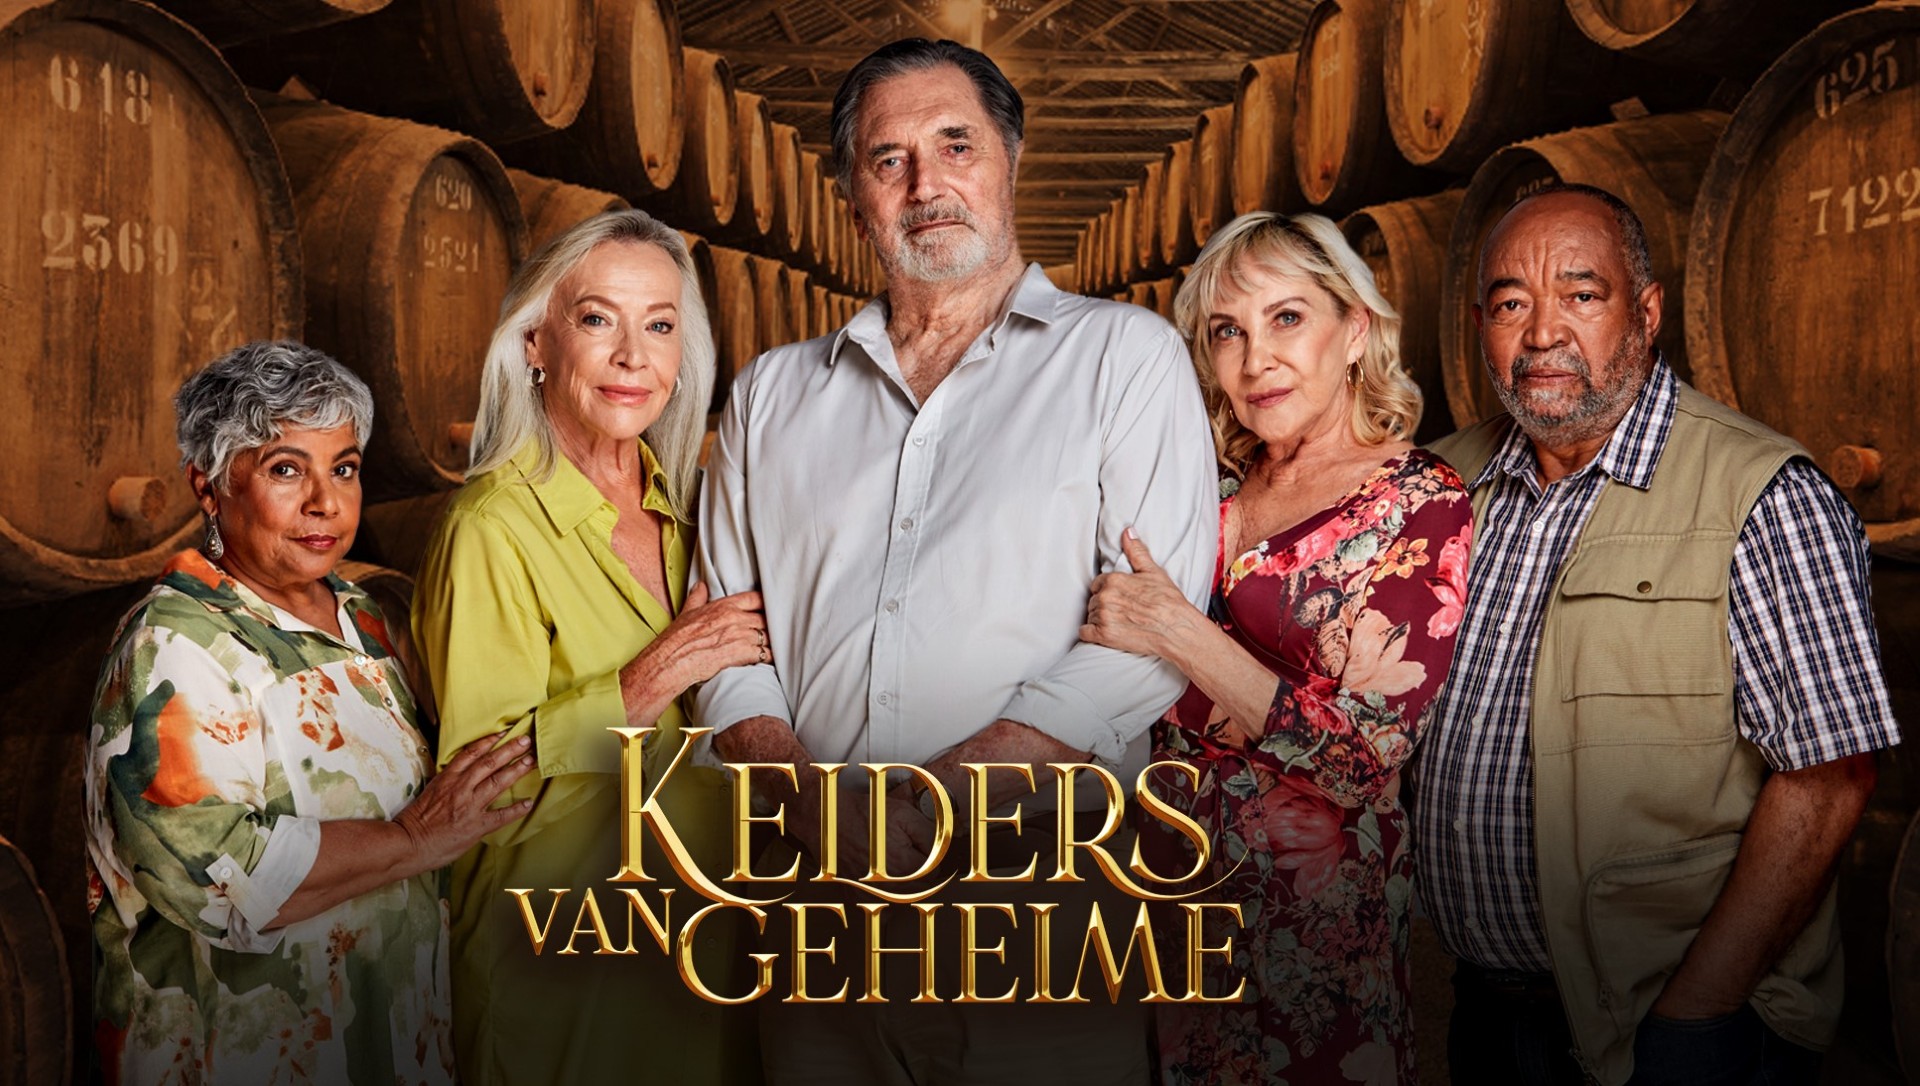 a new era for afrikaans as kelders van geheime airs tonight at 6pm on e.tv